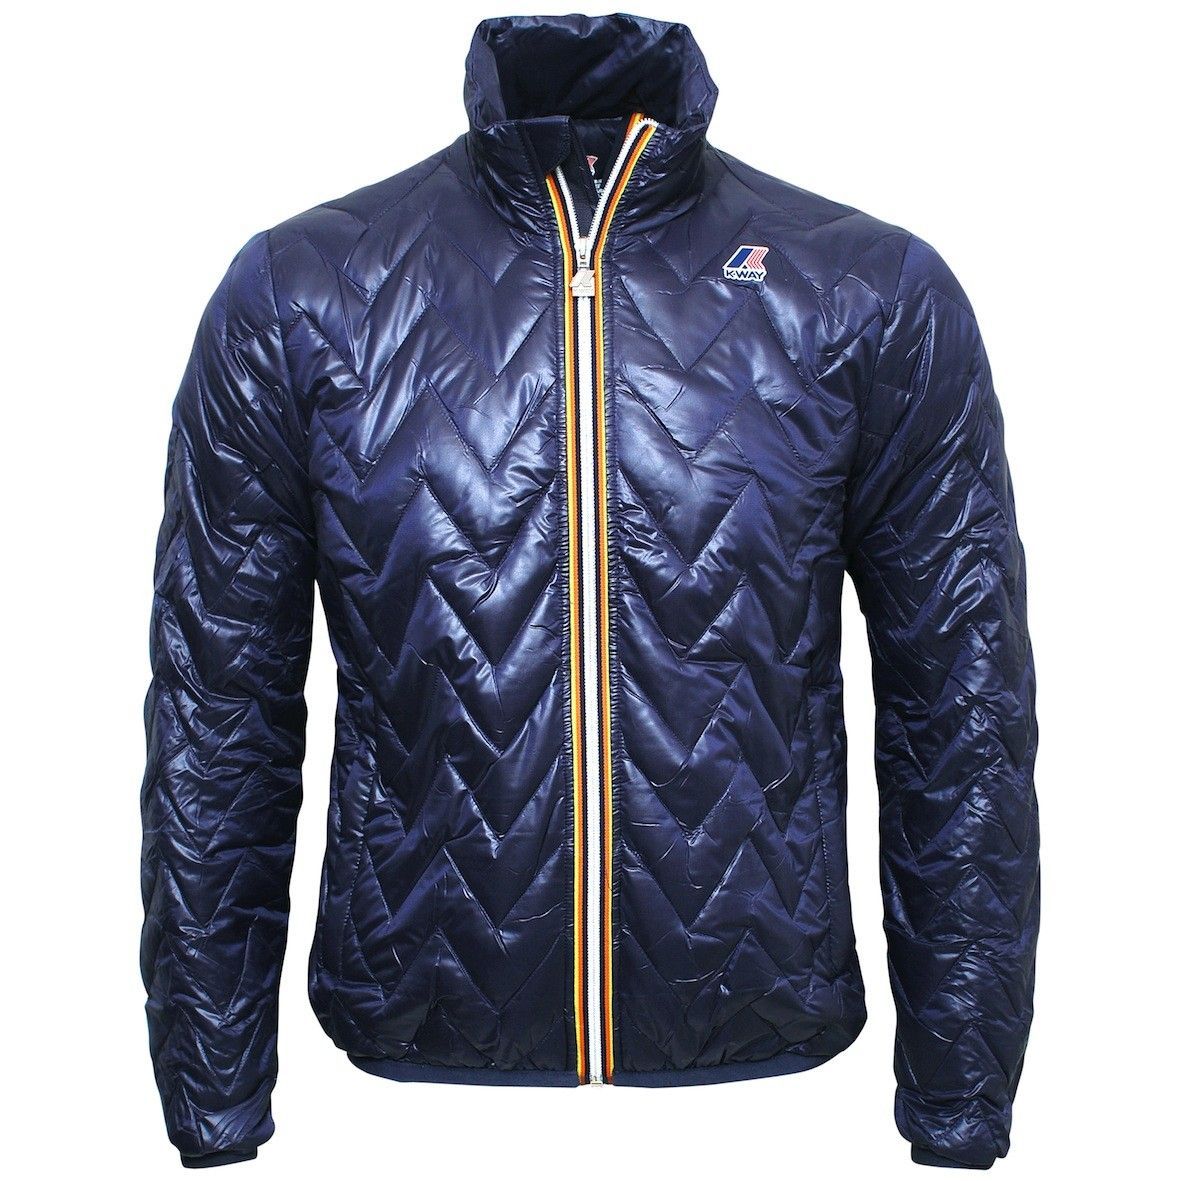 MODELE HOMME VALENTINE THERMO CLAIR A 295 EUROS